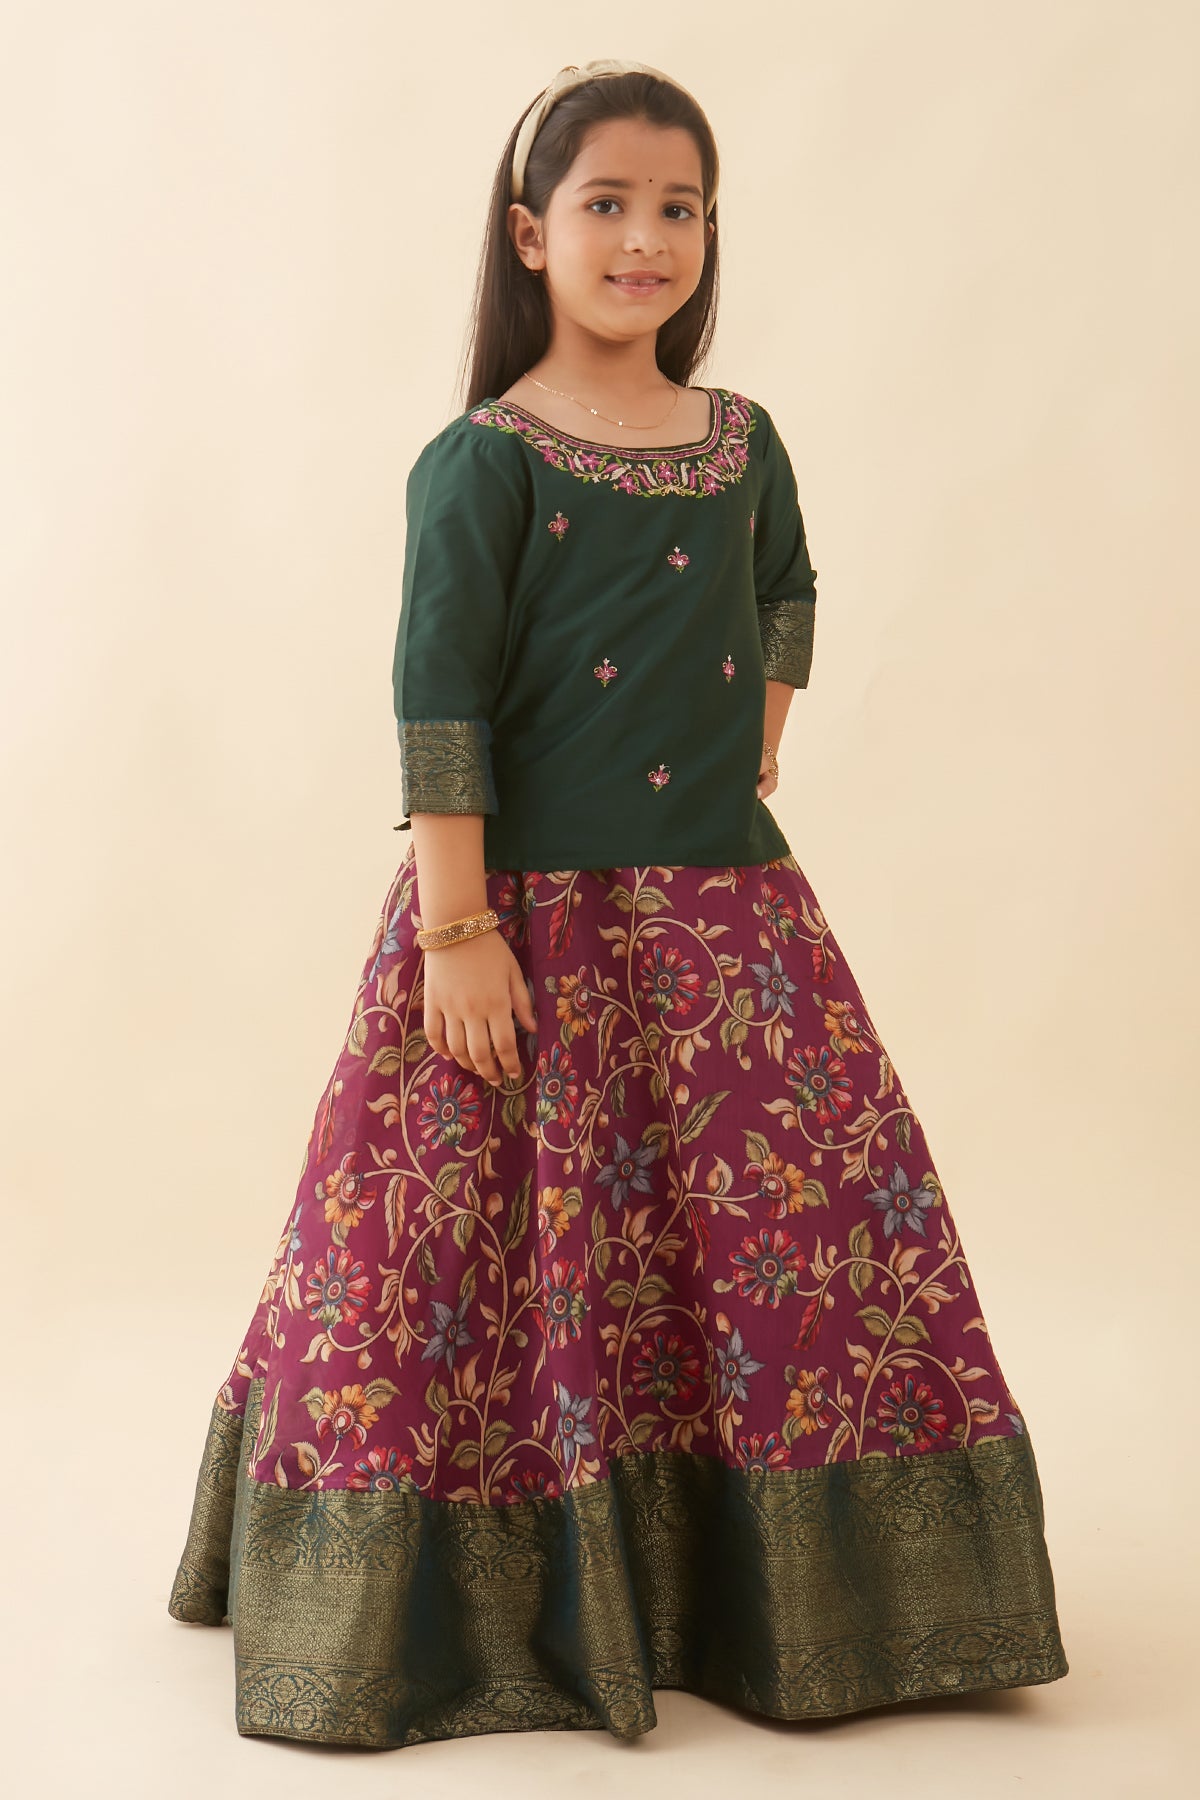 Floral Embroidered & Printed With Zari Border Kids Skirt Set - Green & Purple